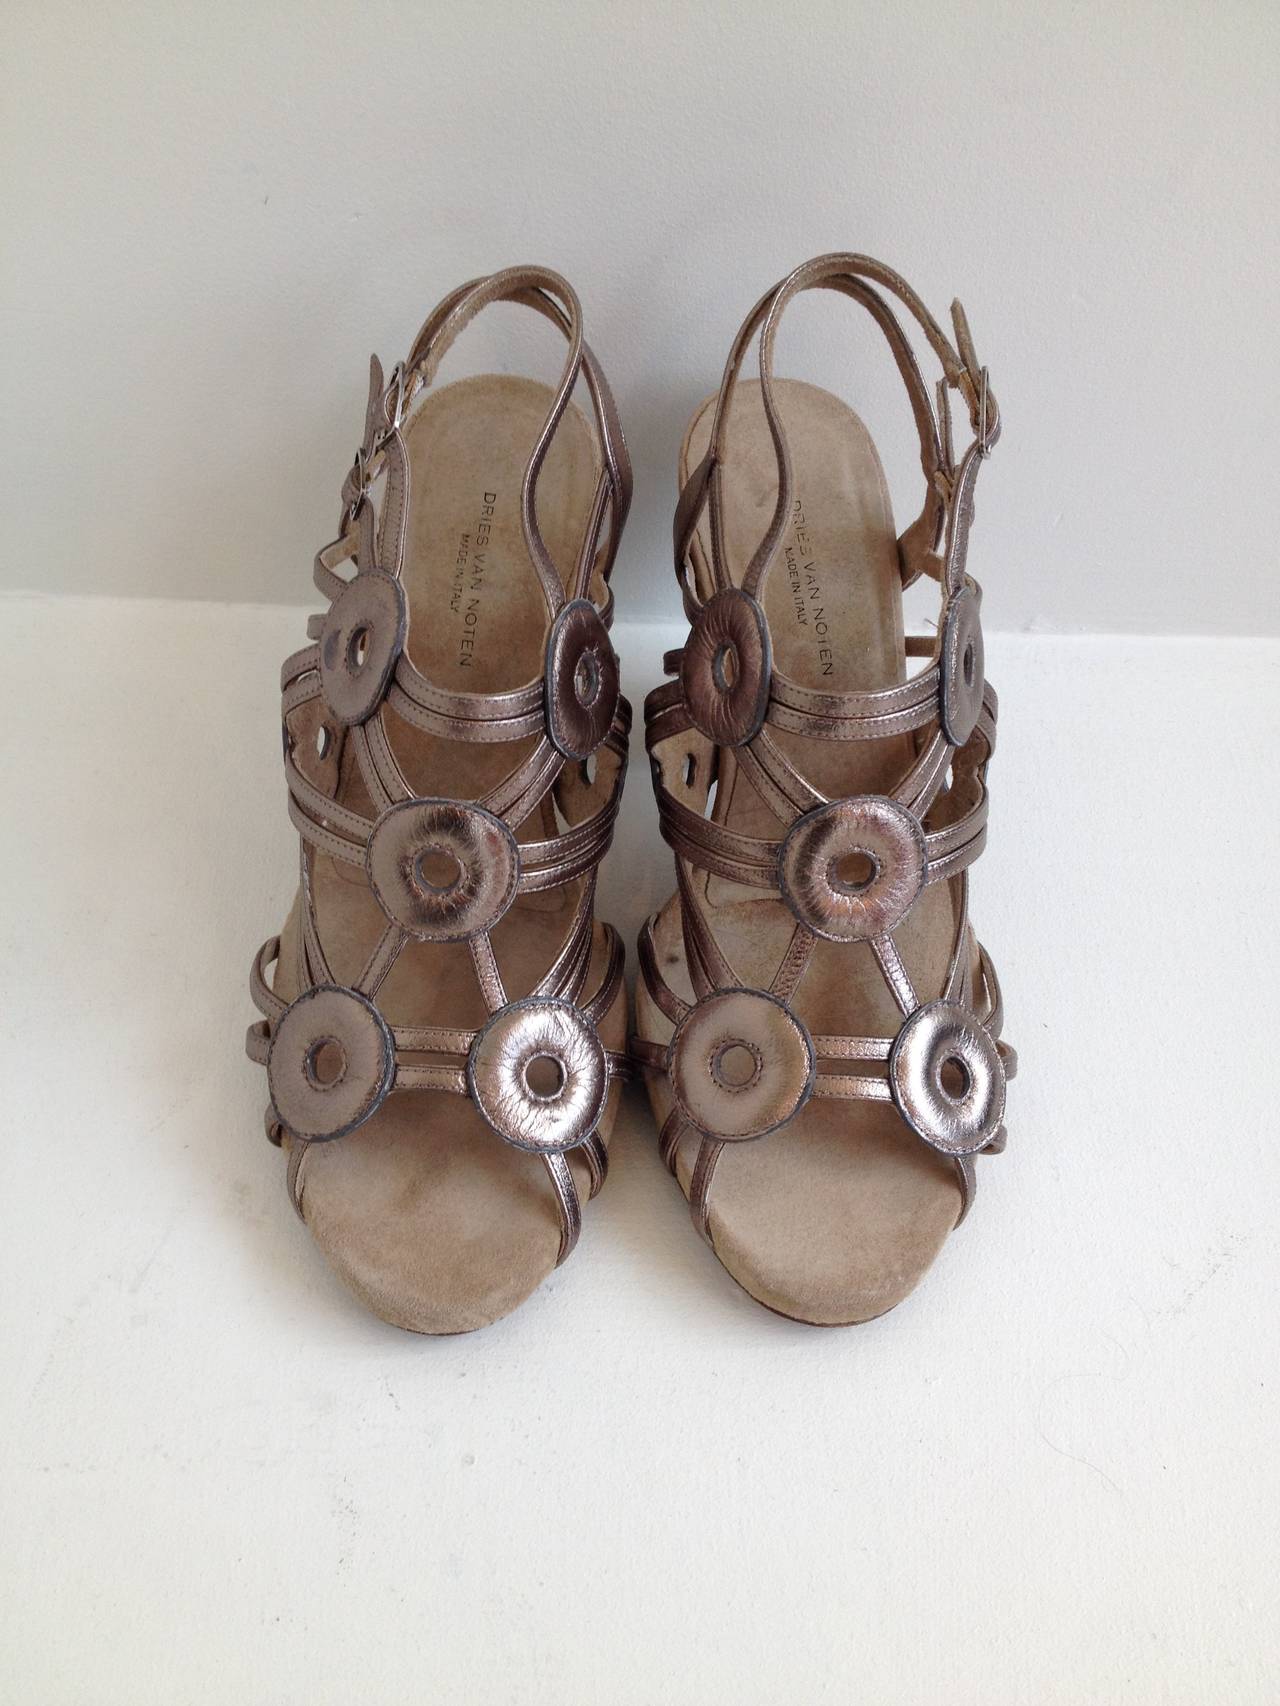 These Dries shoes are the perfect way to wear metallic - the finish is glossy but textured, while the color is somewhere between a bronze and a frosty silver. The strappy body is decorated with five leather discs shaped like donuts. Wear these